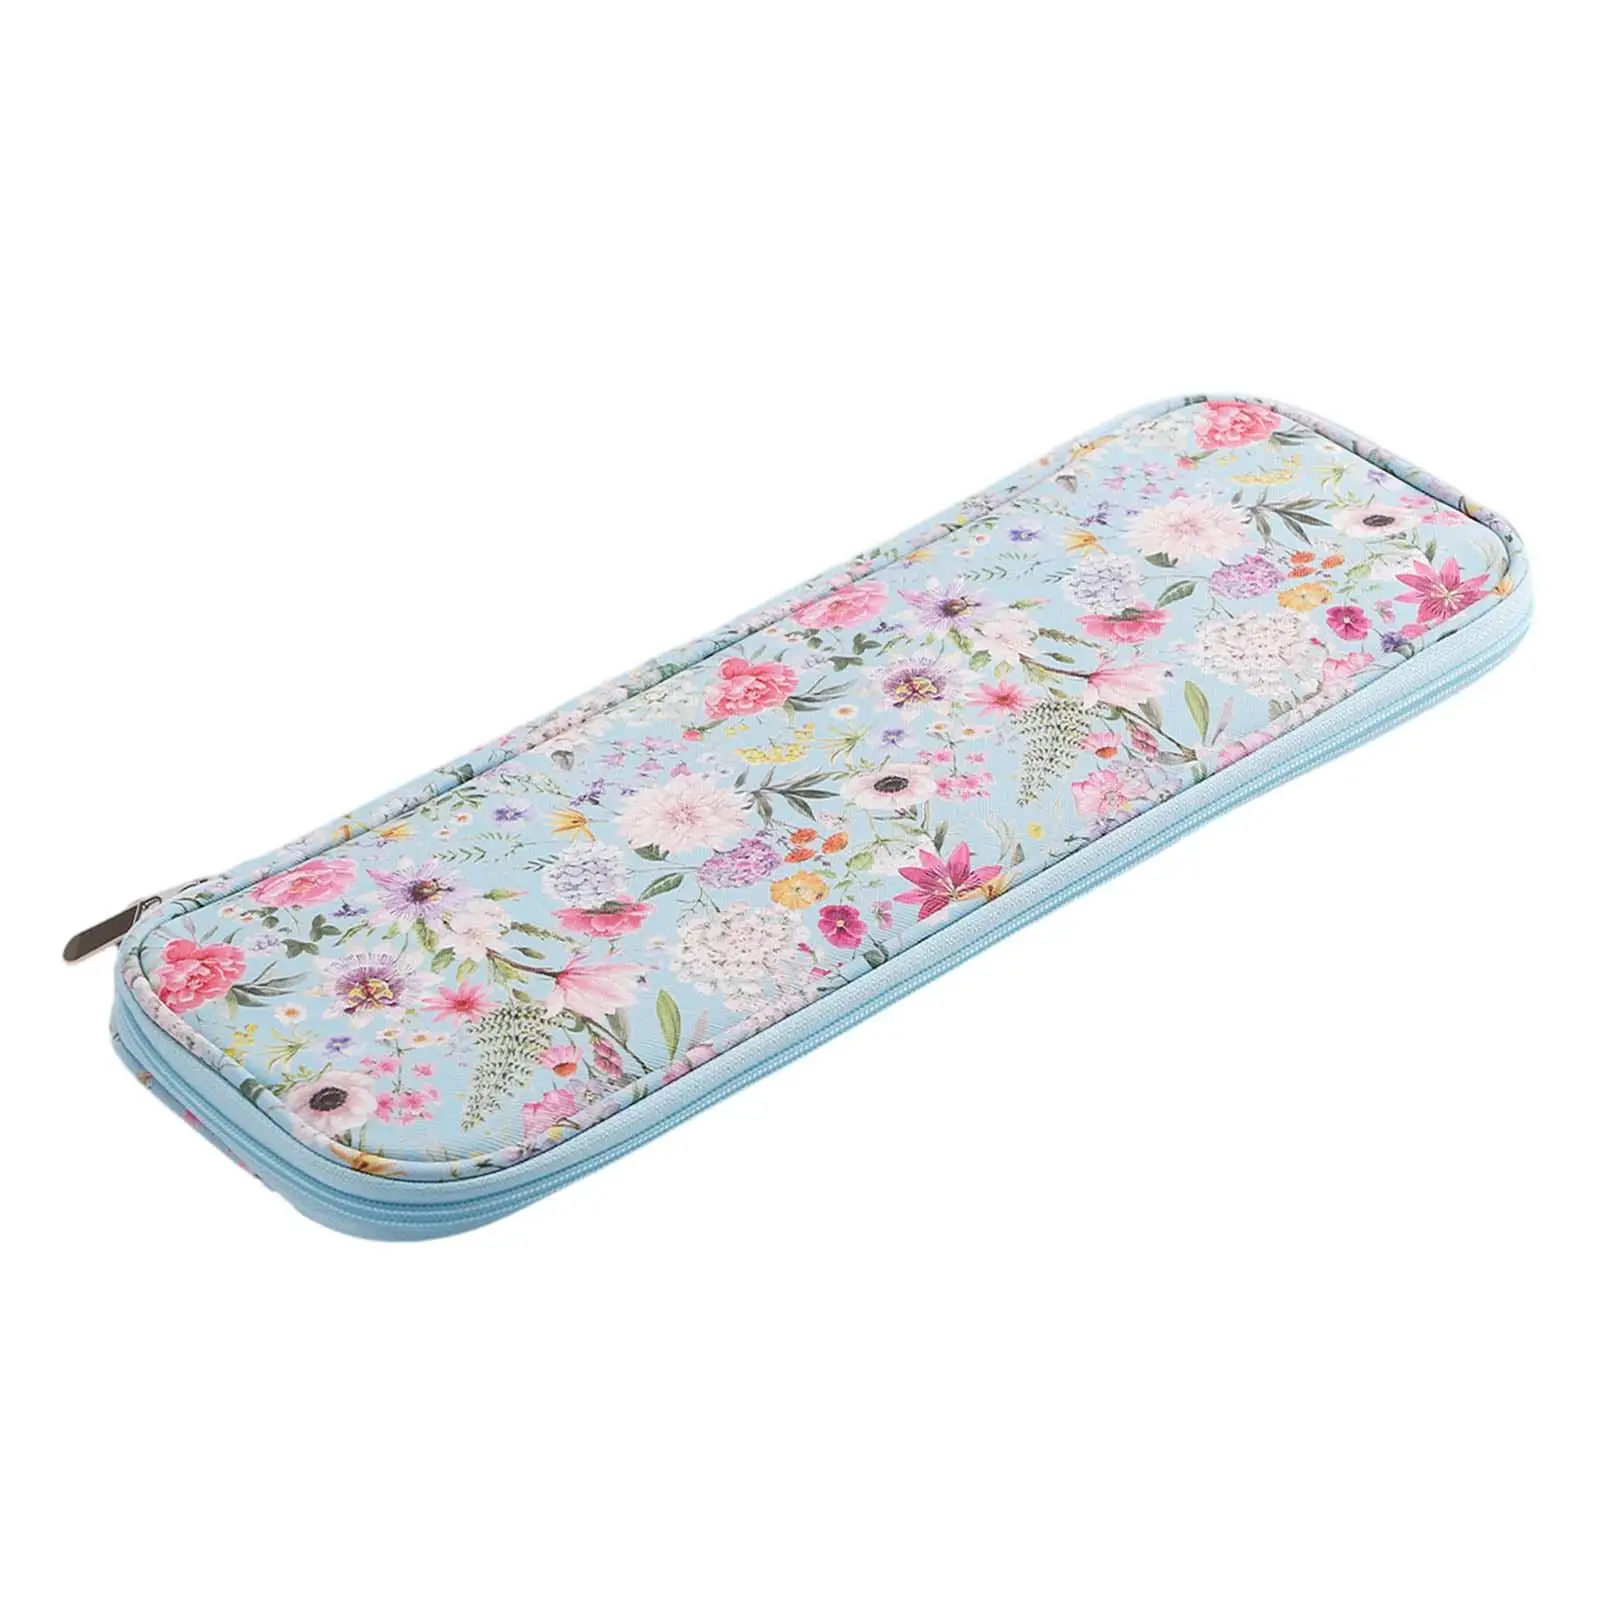 Crochet Hooks Storage Bag Compact Sturdy Airport, Park, Train, Boat, Home Knitting Multifunctional Multiple Internal Pockets